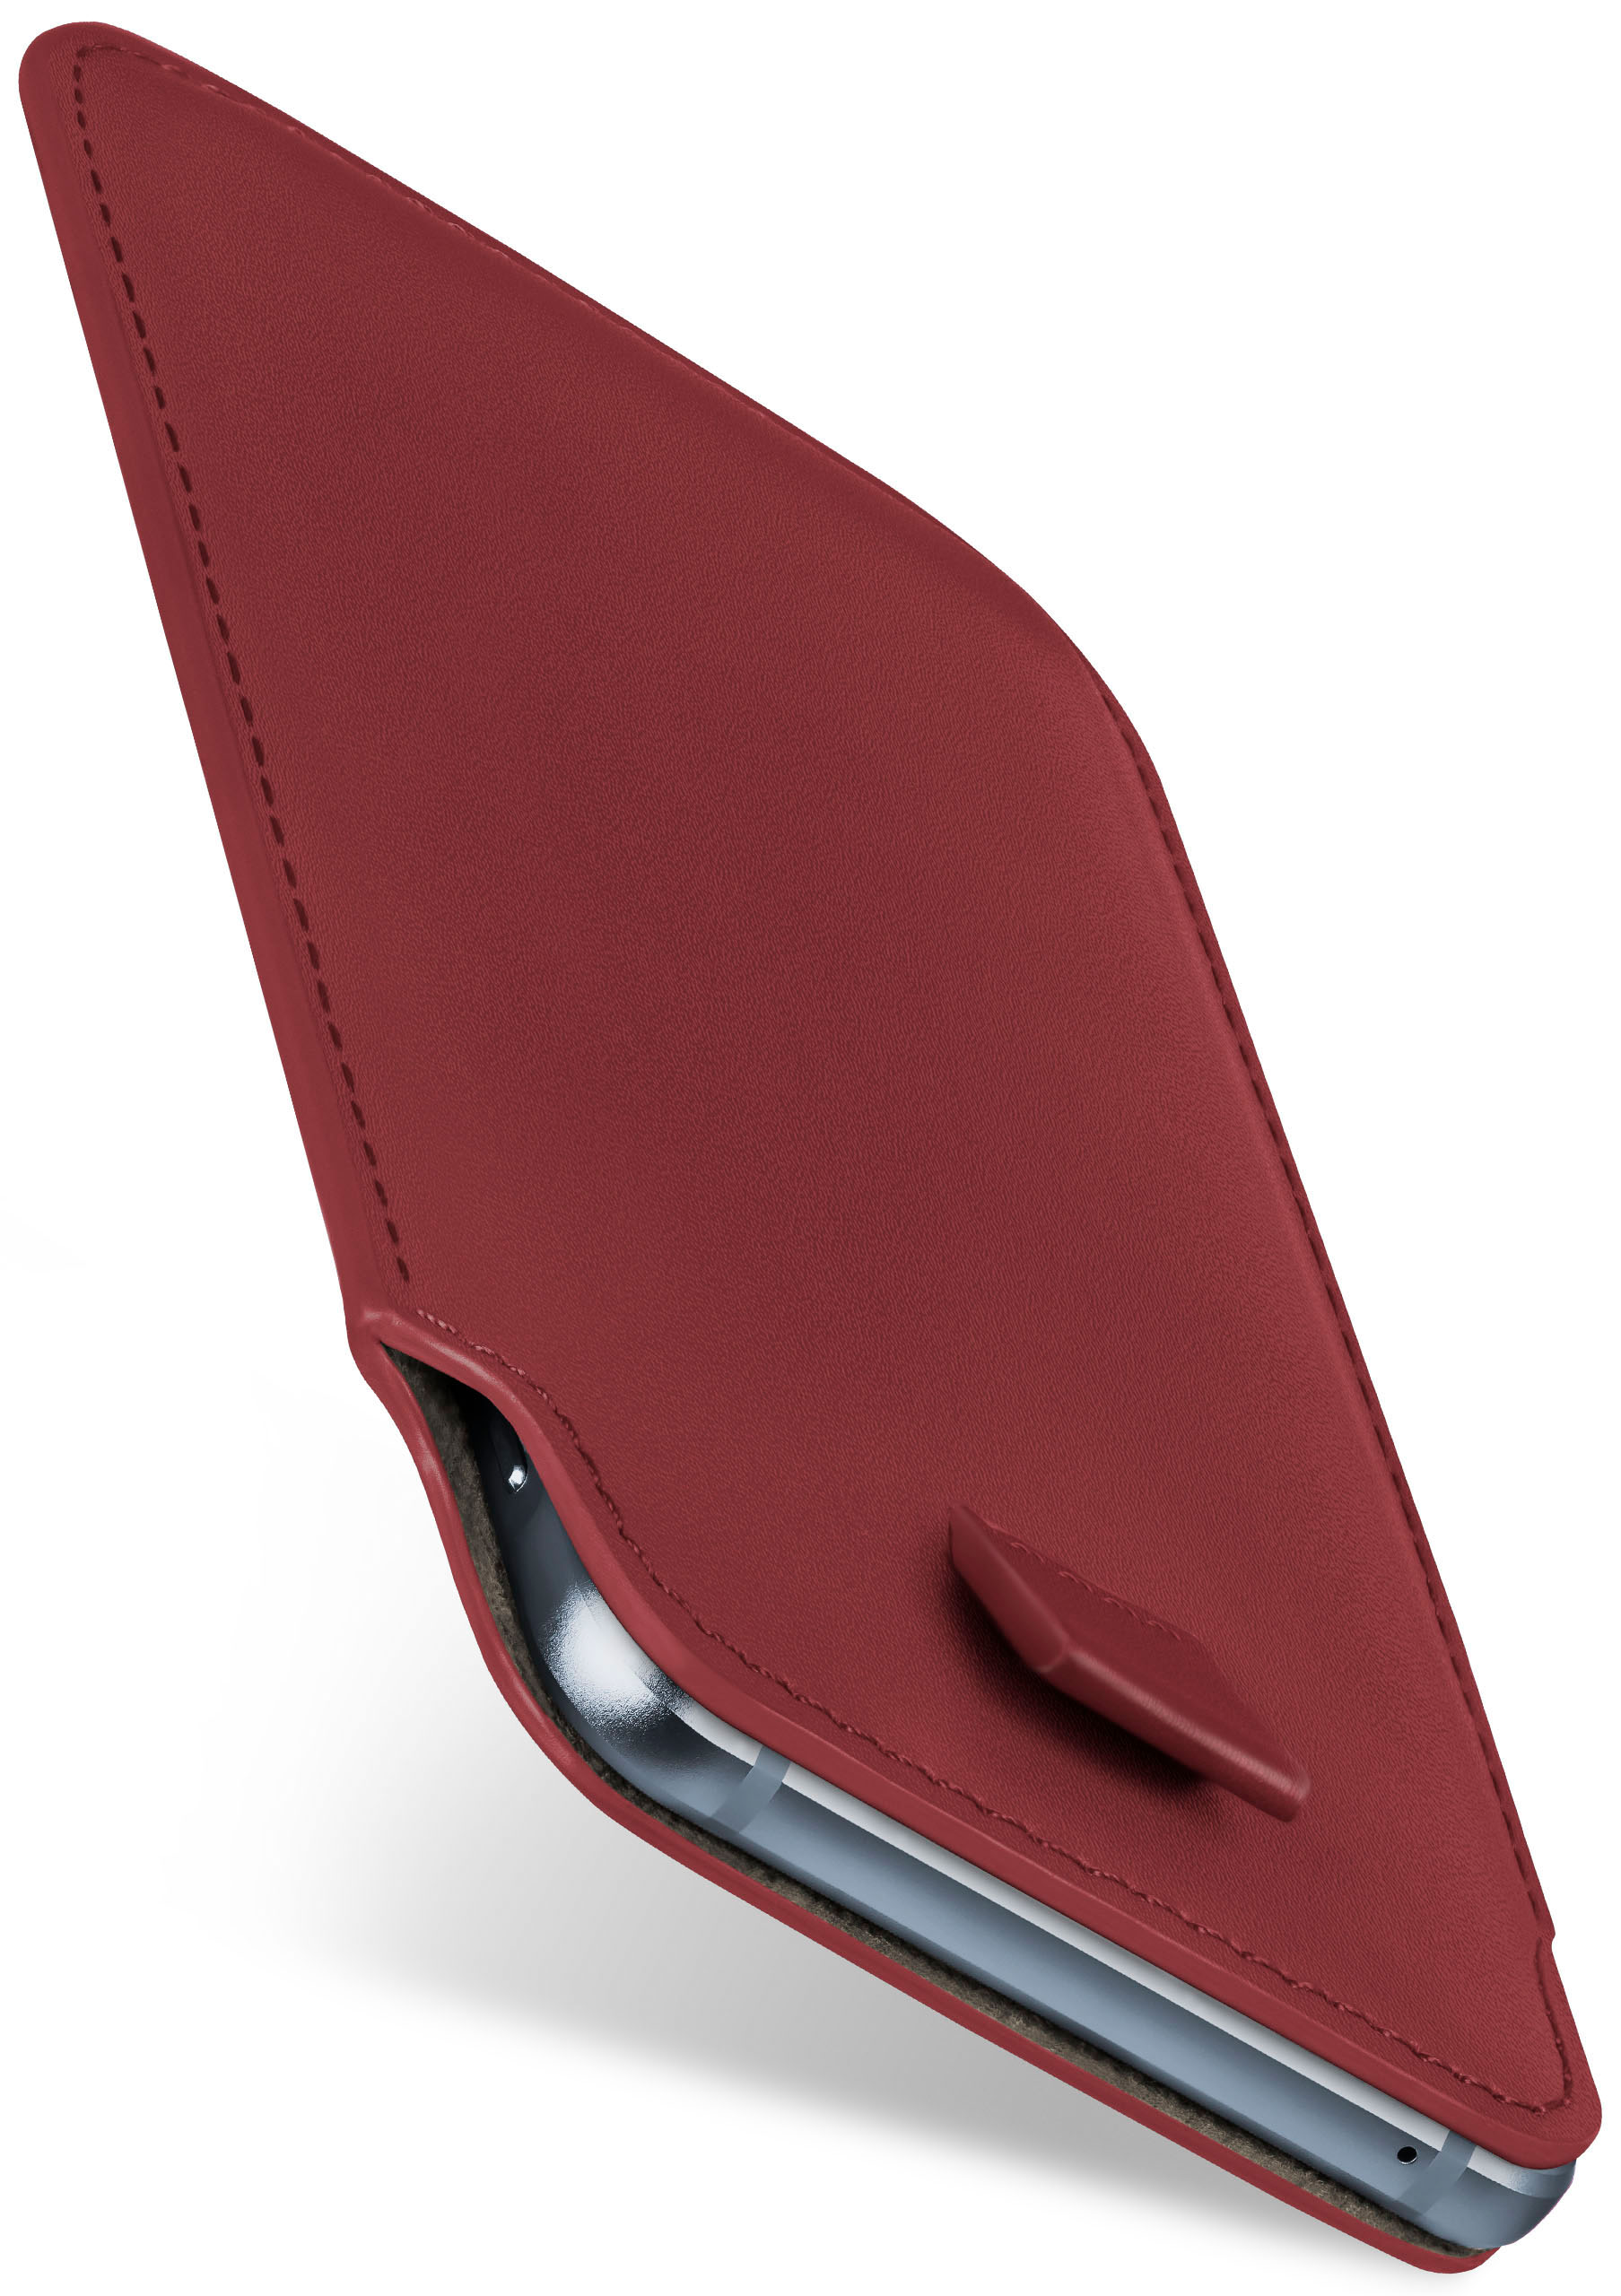 MOEX Slide Case, Full 515, Nokia, Cover, Maroon-Red